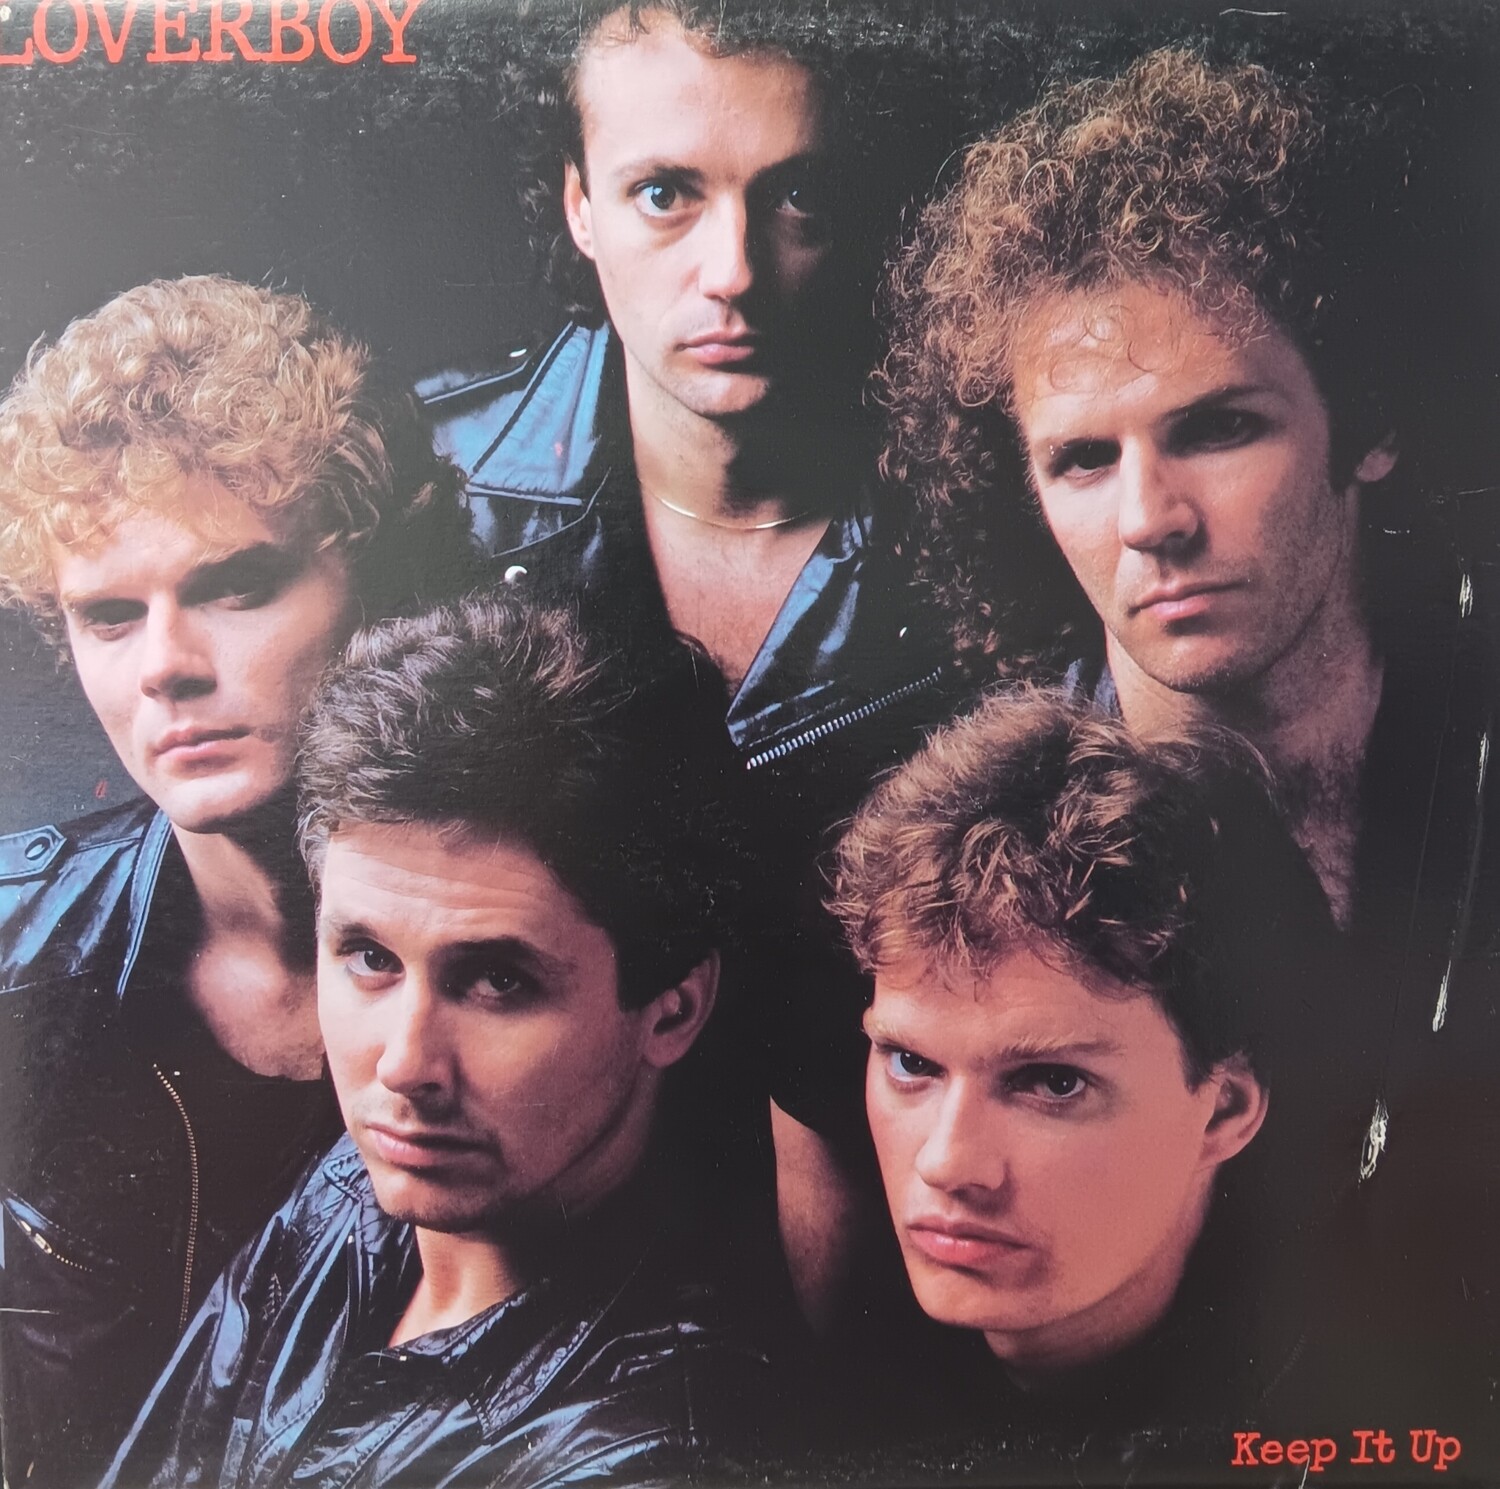 LOVERBOY - Keep it up